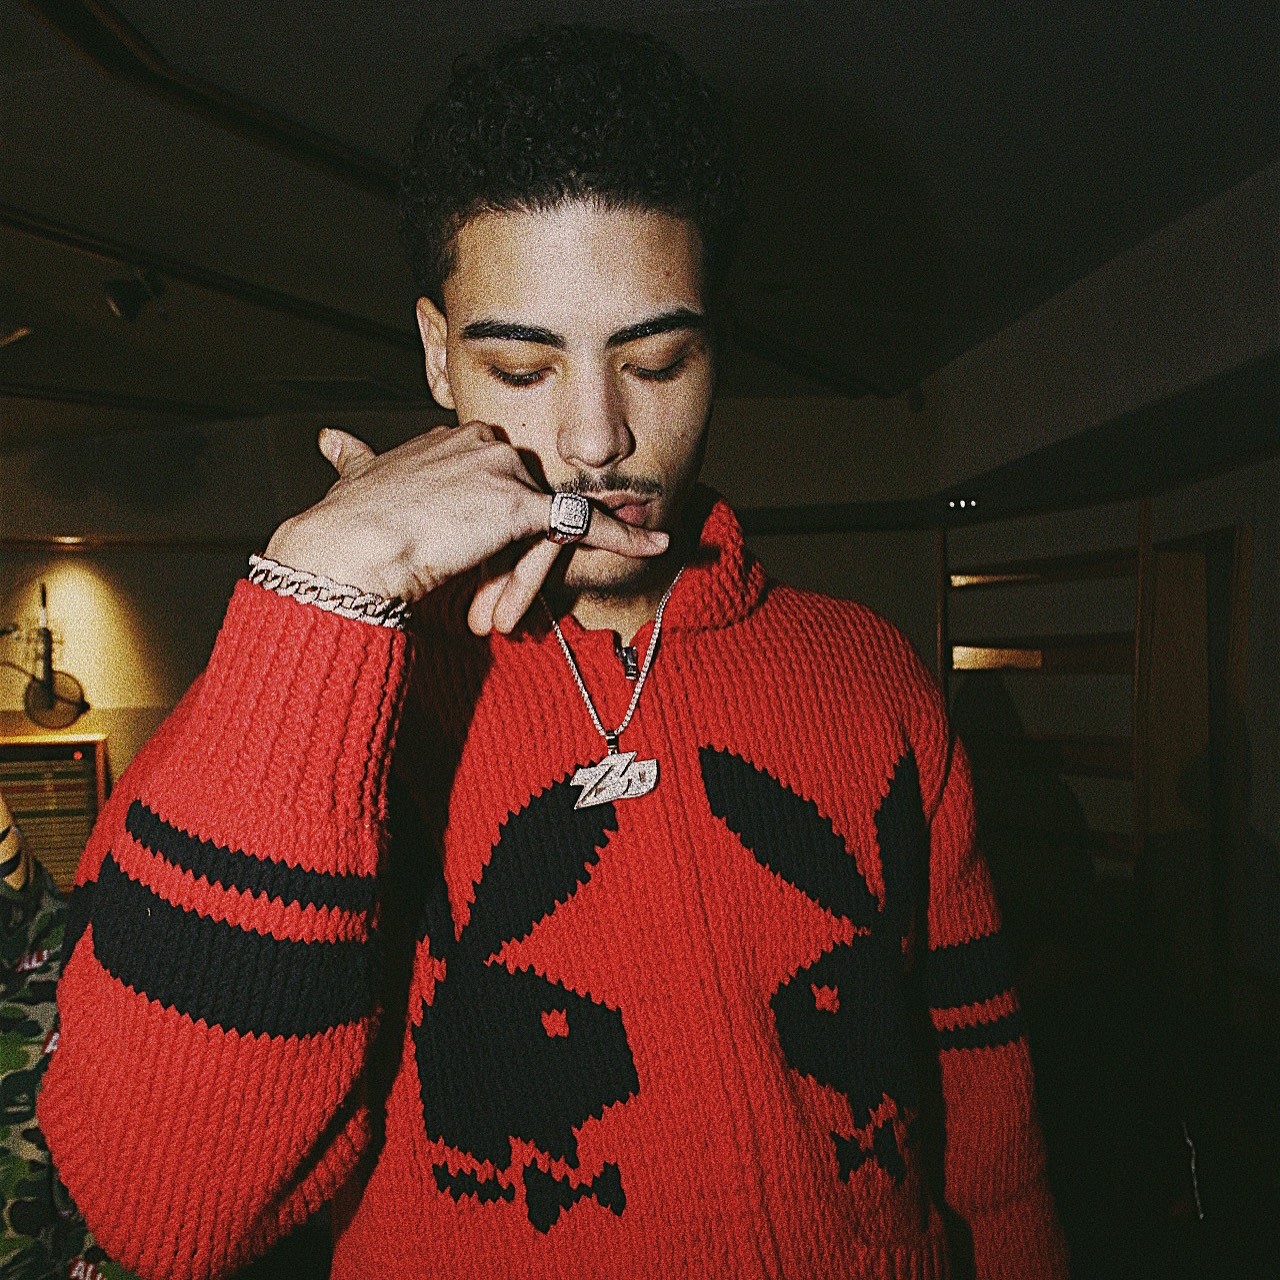 Jay Critch is the new New York